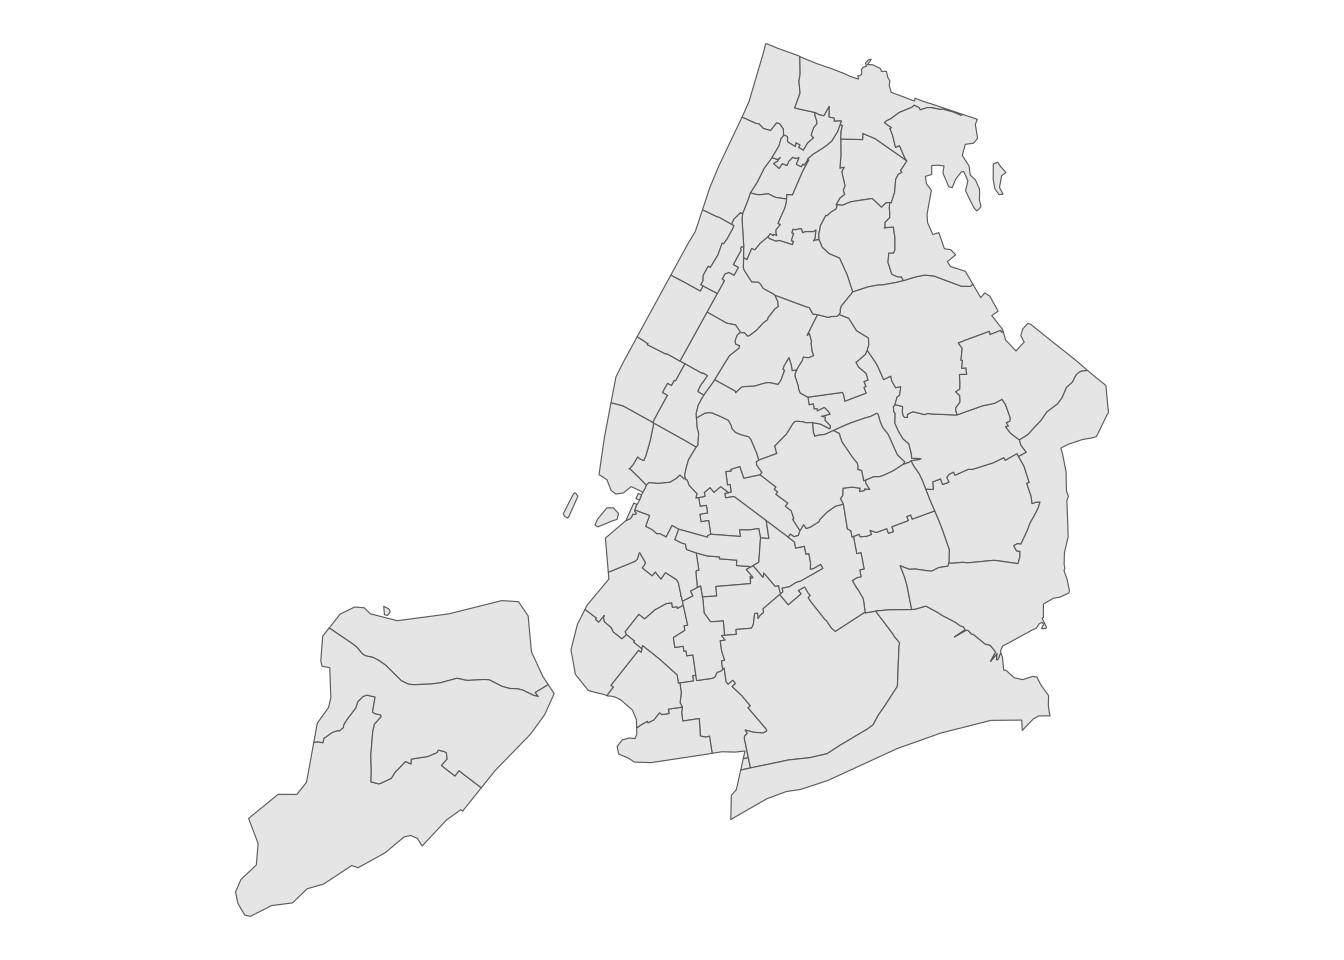 Map of PUMAs in New York City